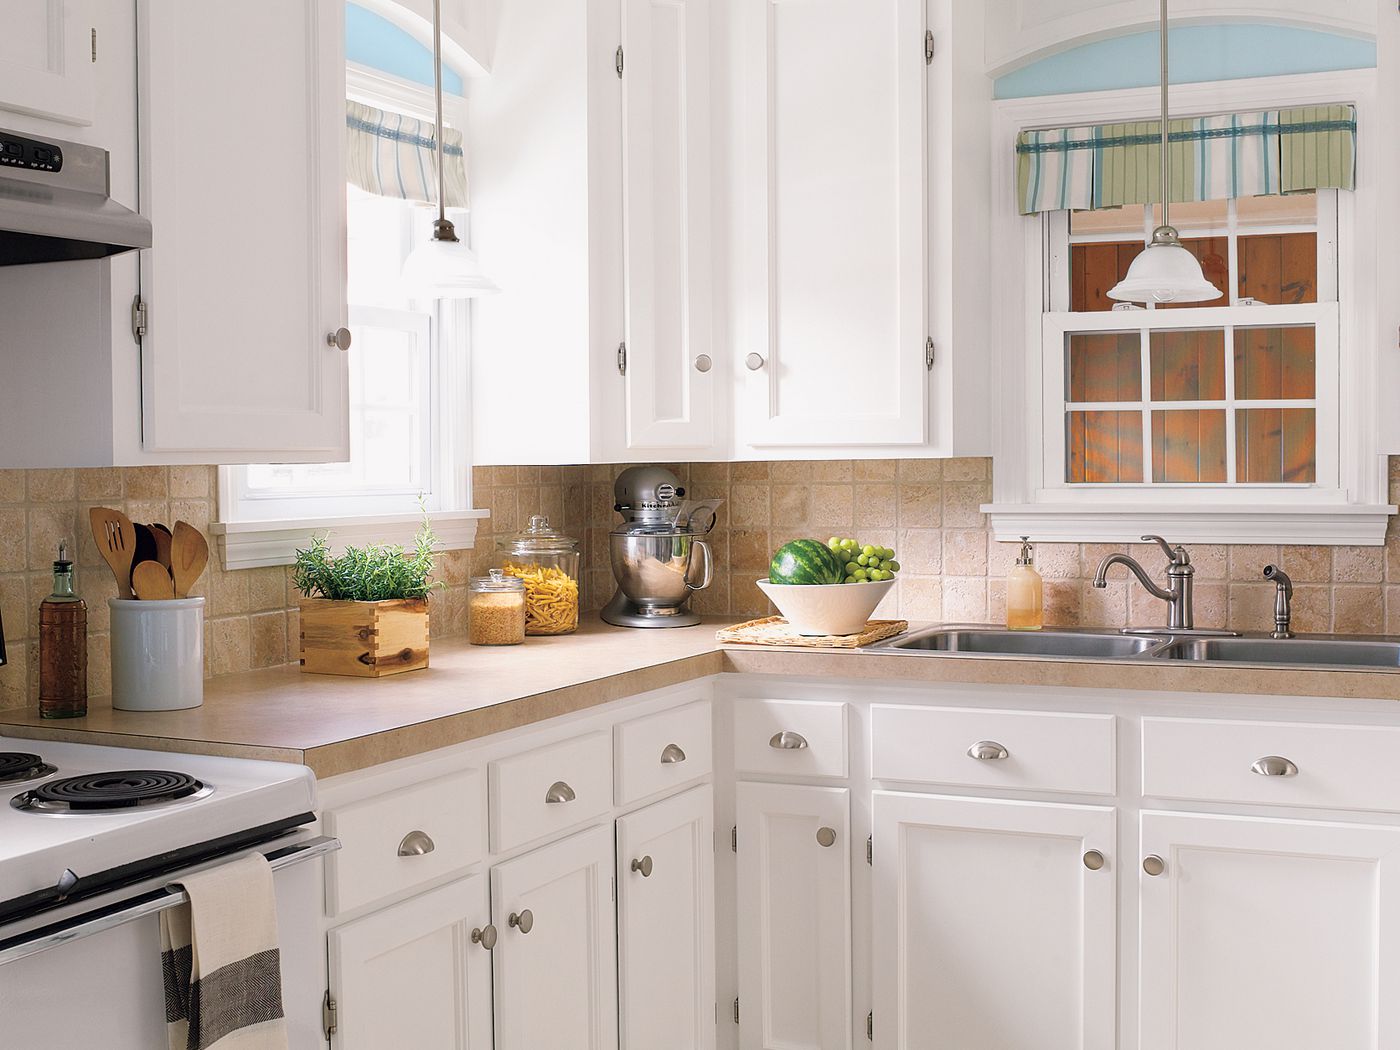 Top 25 Budget Kitchen and Bath Remodels   This Old House